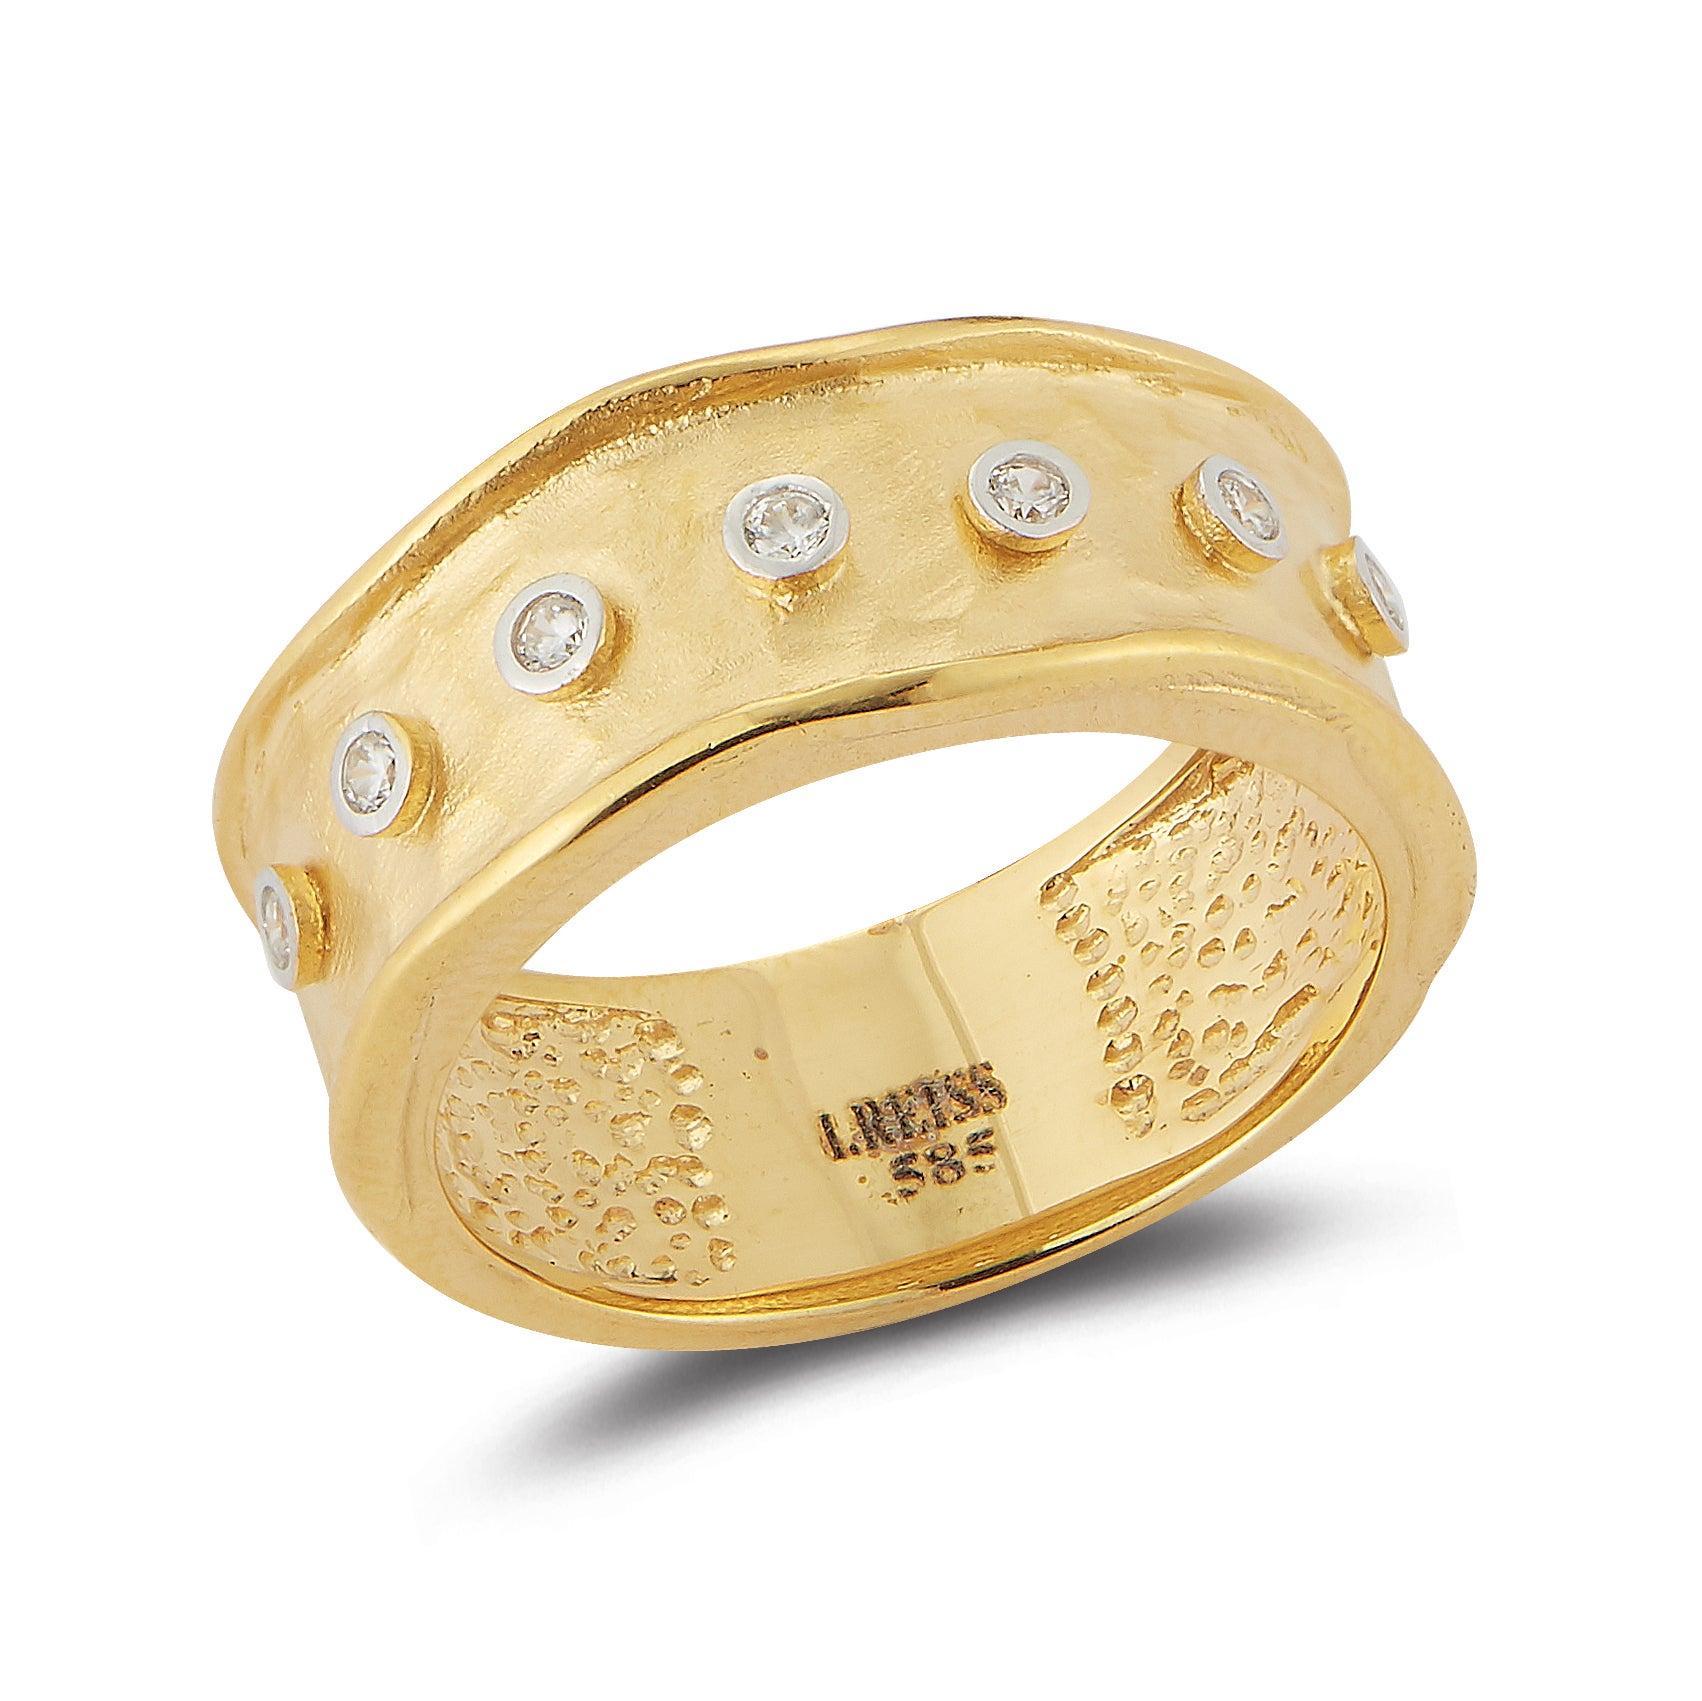 For Sale:  Handcrafted 14 Karat Yellow Gold Hammered Narrow Rings with Bezel Diamonds 2